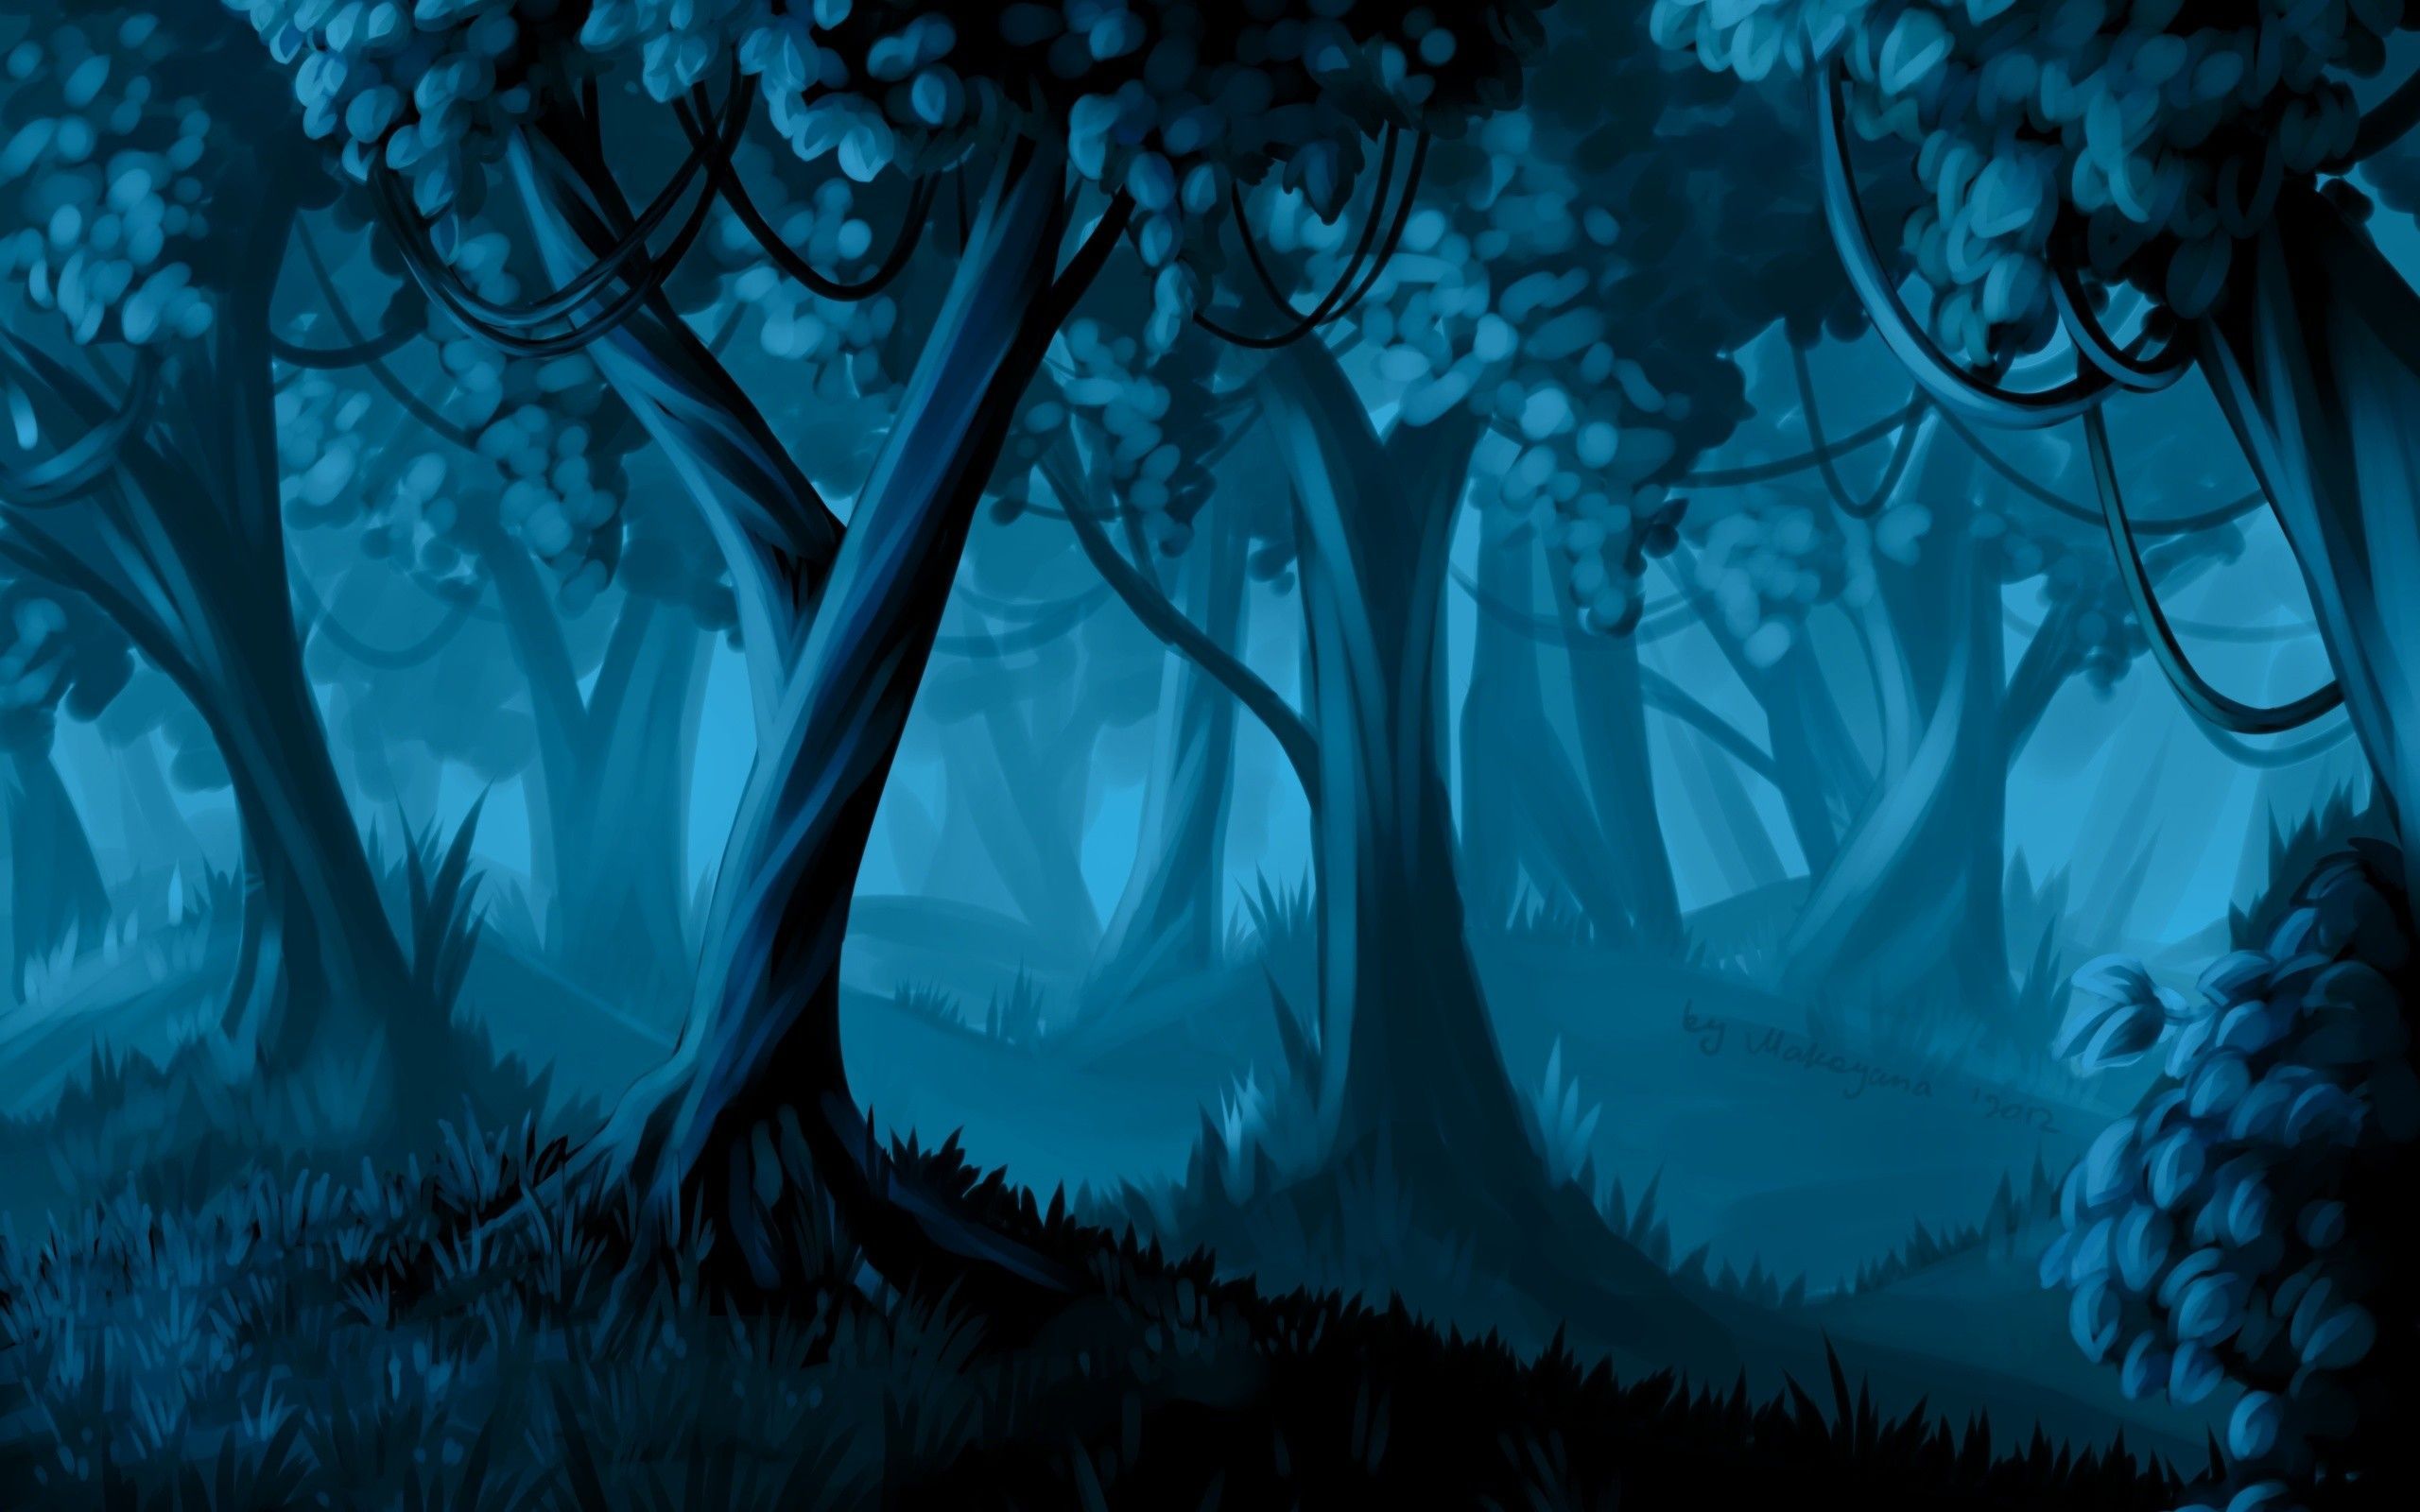 Blue forest in the night from the story. Drawings, Paintings, Sketches, Design, Artwork Wallpaper. HD Wallp. Fantasy forest, Blue forest, Forest painting